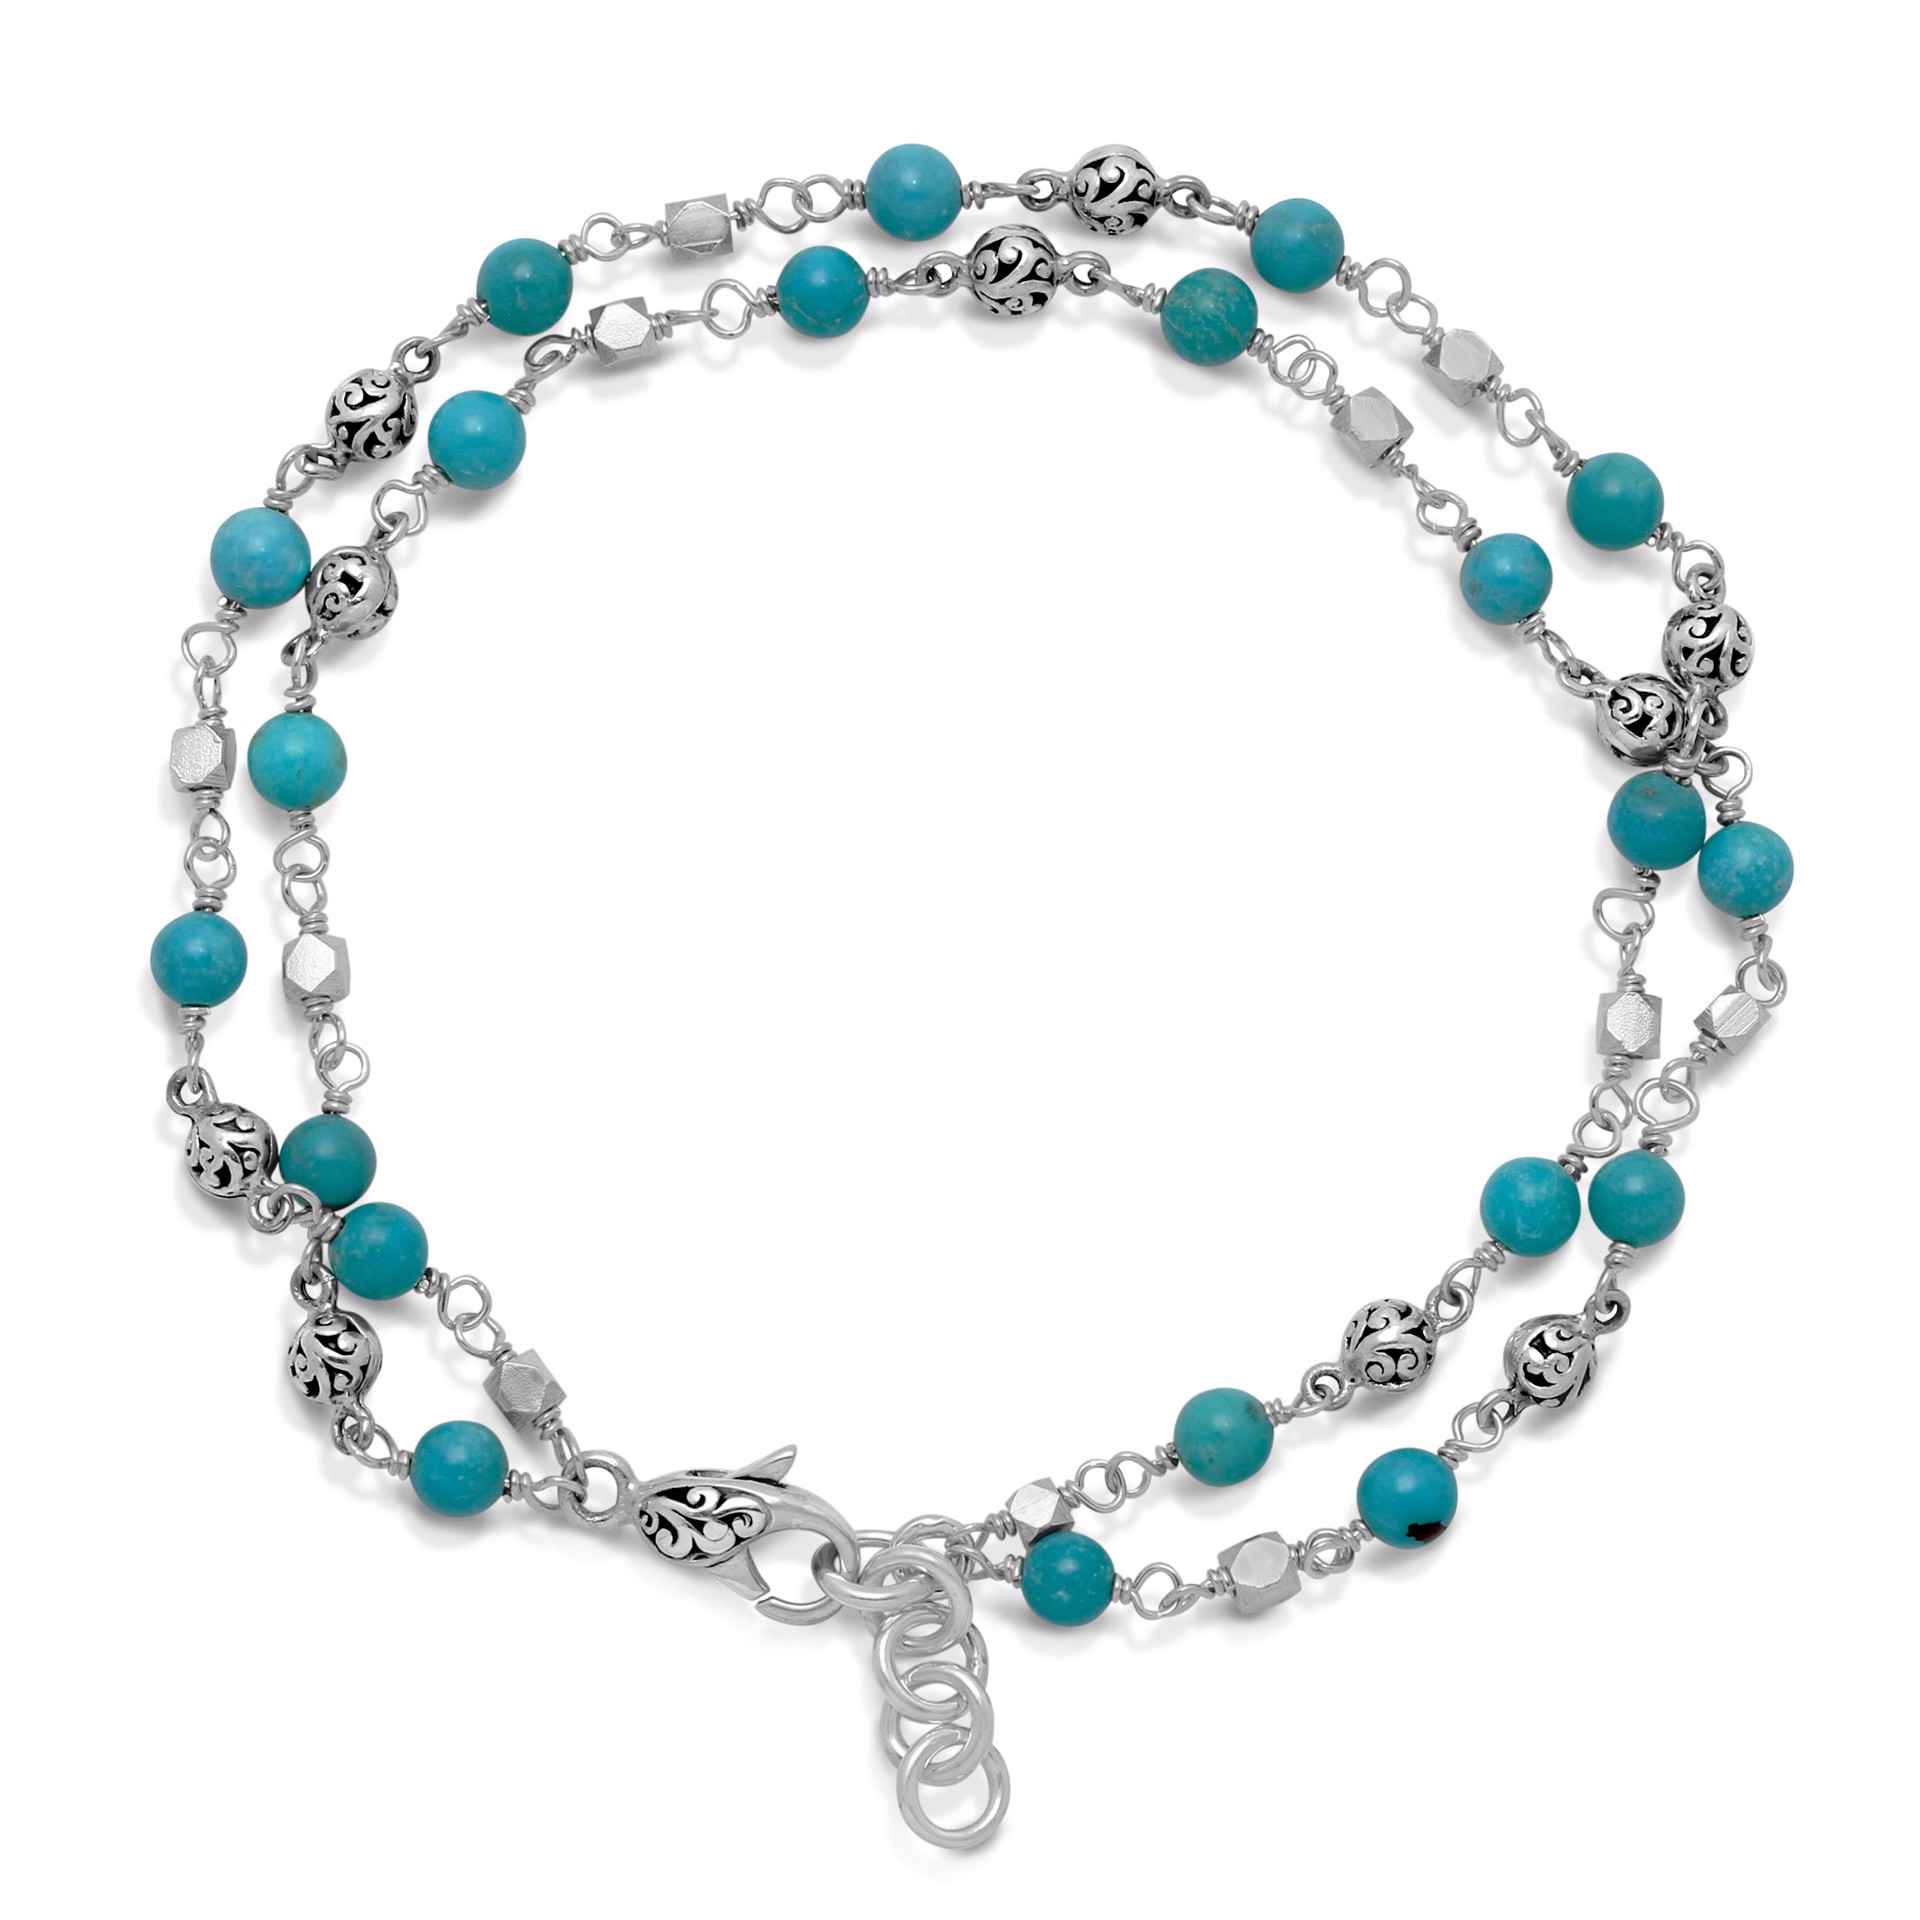 9673 Blue Turquoise & LH Scroll Beads (4mm) Dual Strand Wire-Wrapped Bracelet by Lois Hill